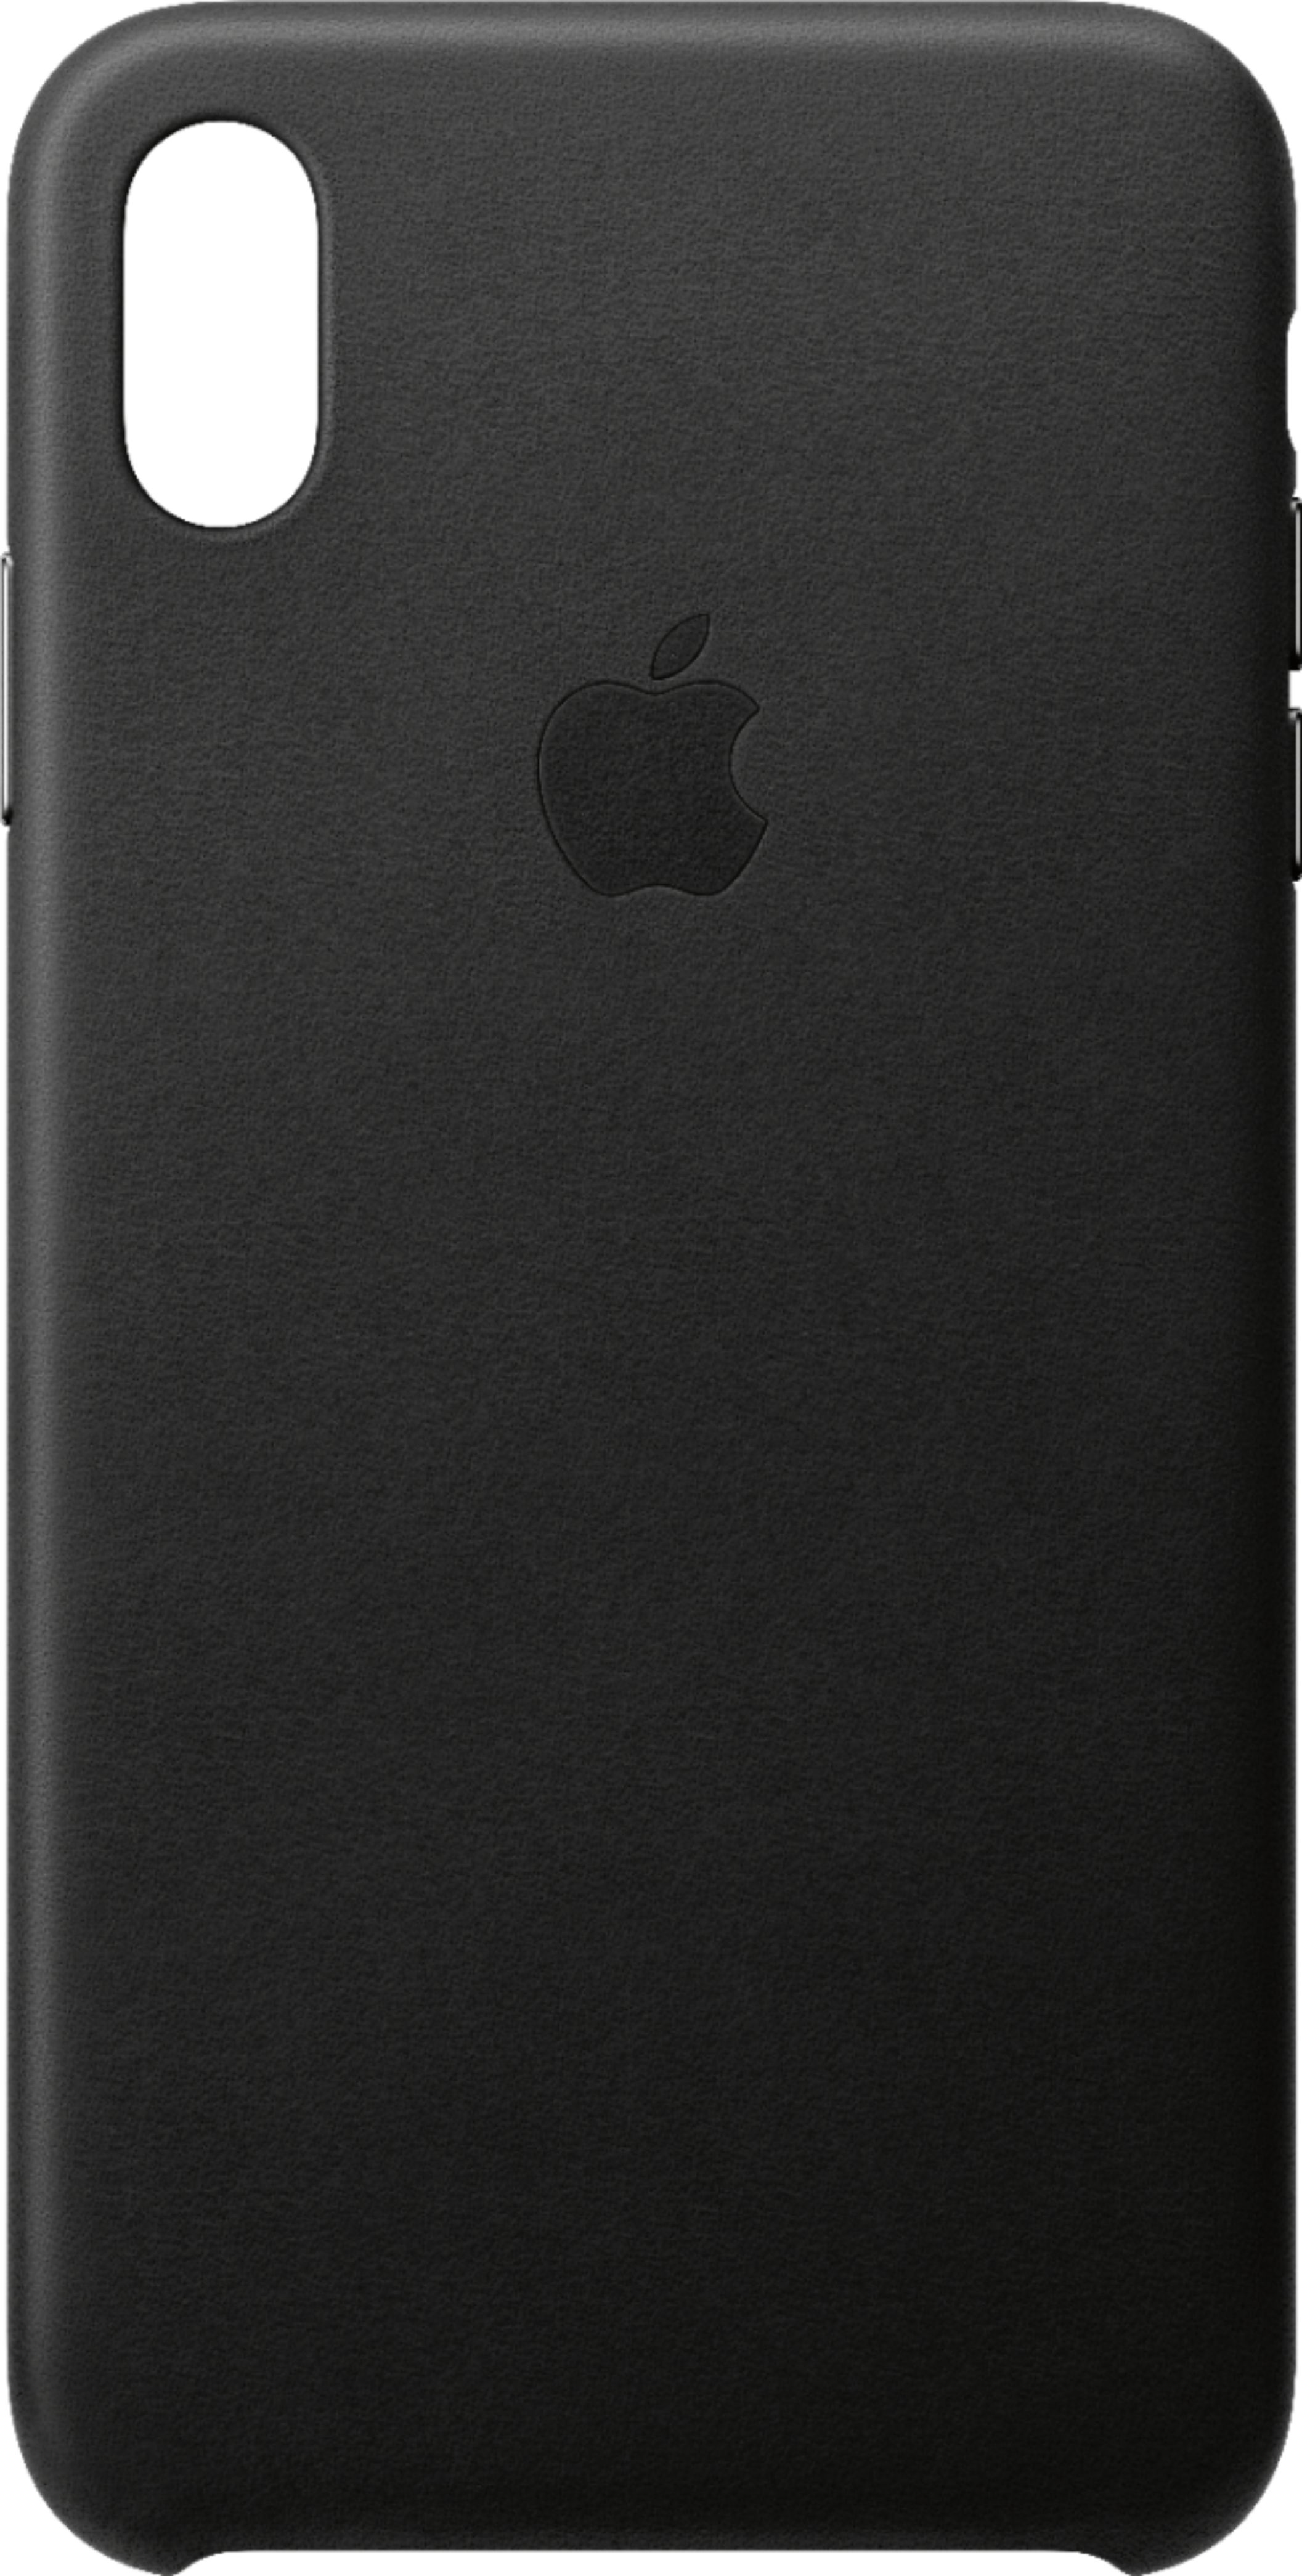 Apple - iPhone® XS Max Leather Case - Black